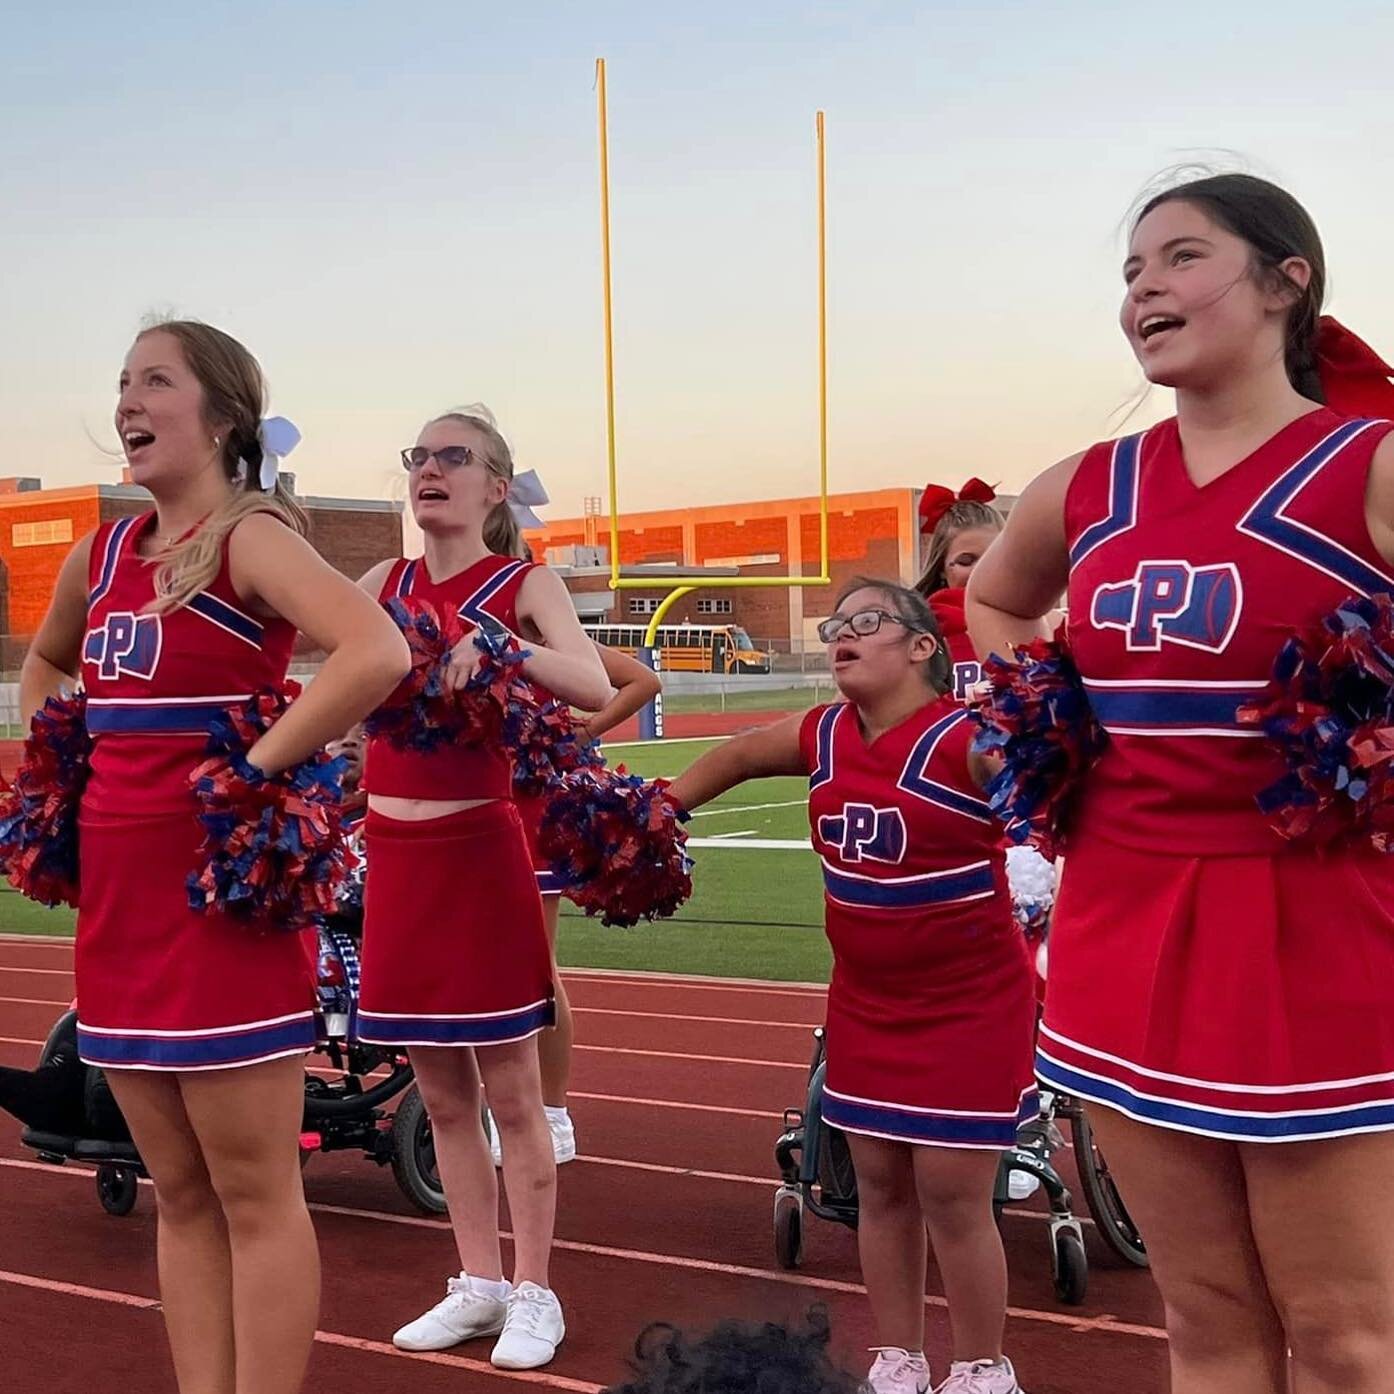 Why does GenS start inclusive spirit teams? Because spirit UNITES. Want to bring the spirit of inclusion to your school? Now&rsquo;s the perfect time to get started. Learn more at the link in our bio. ✨